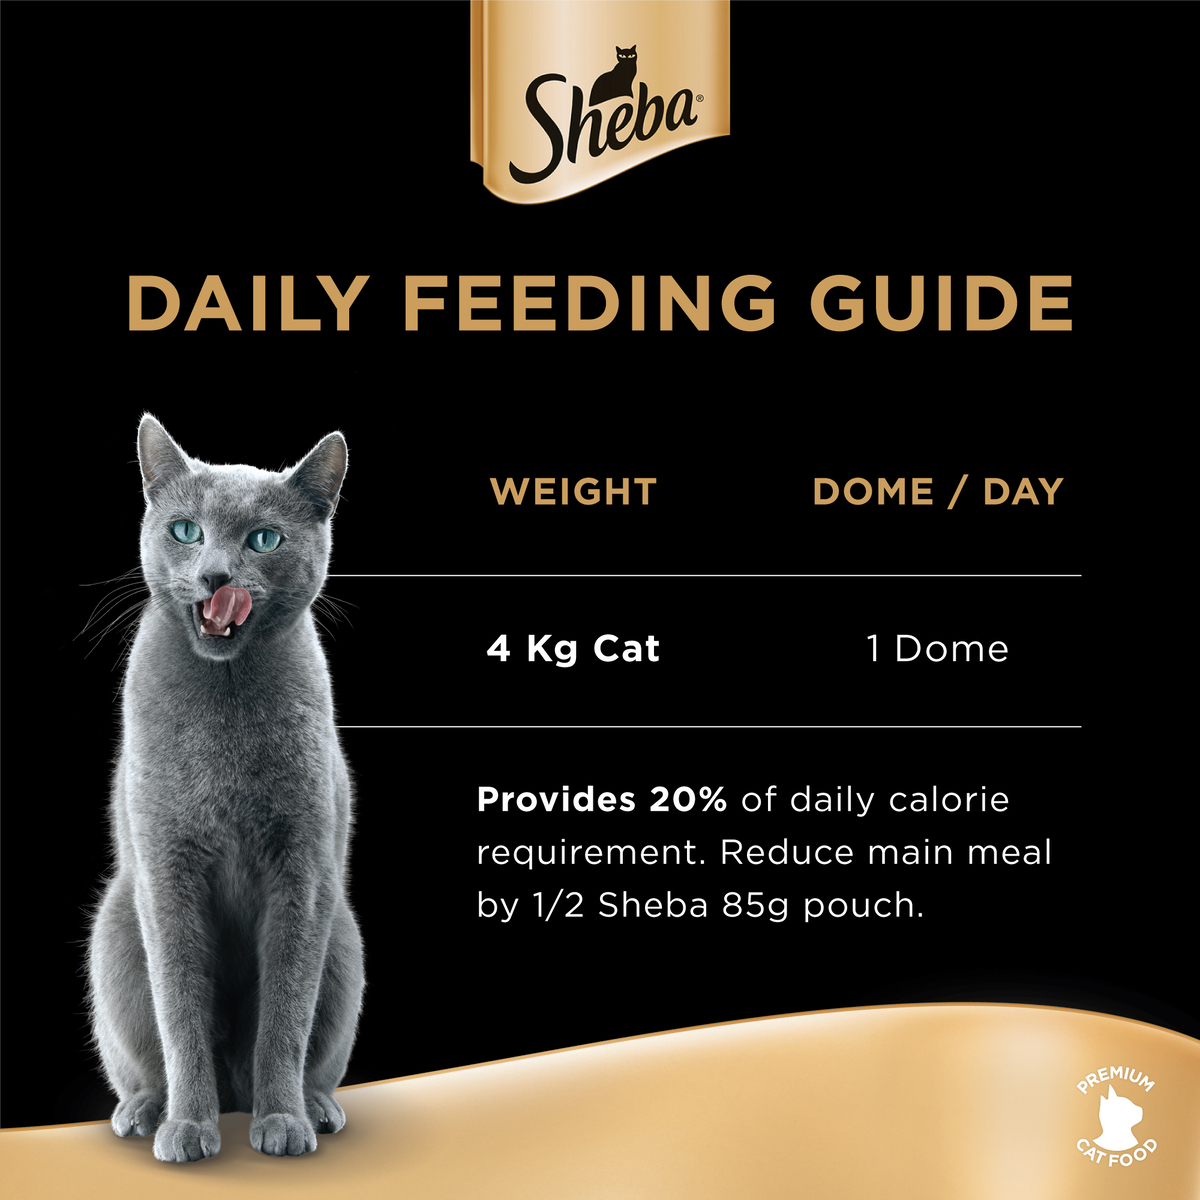 Sheba Fillets Chicken With Sustainable Tuna Cat Food 16 x 60 g